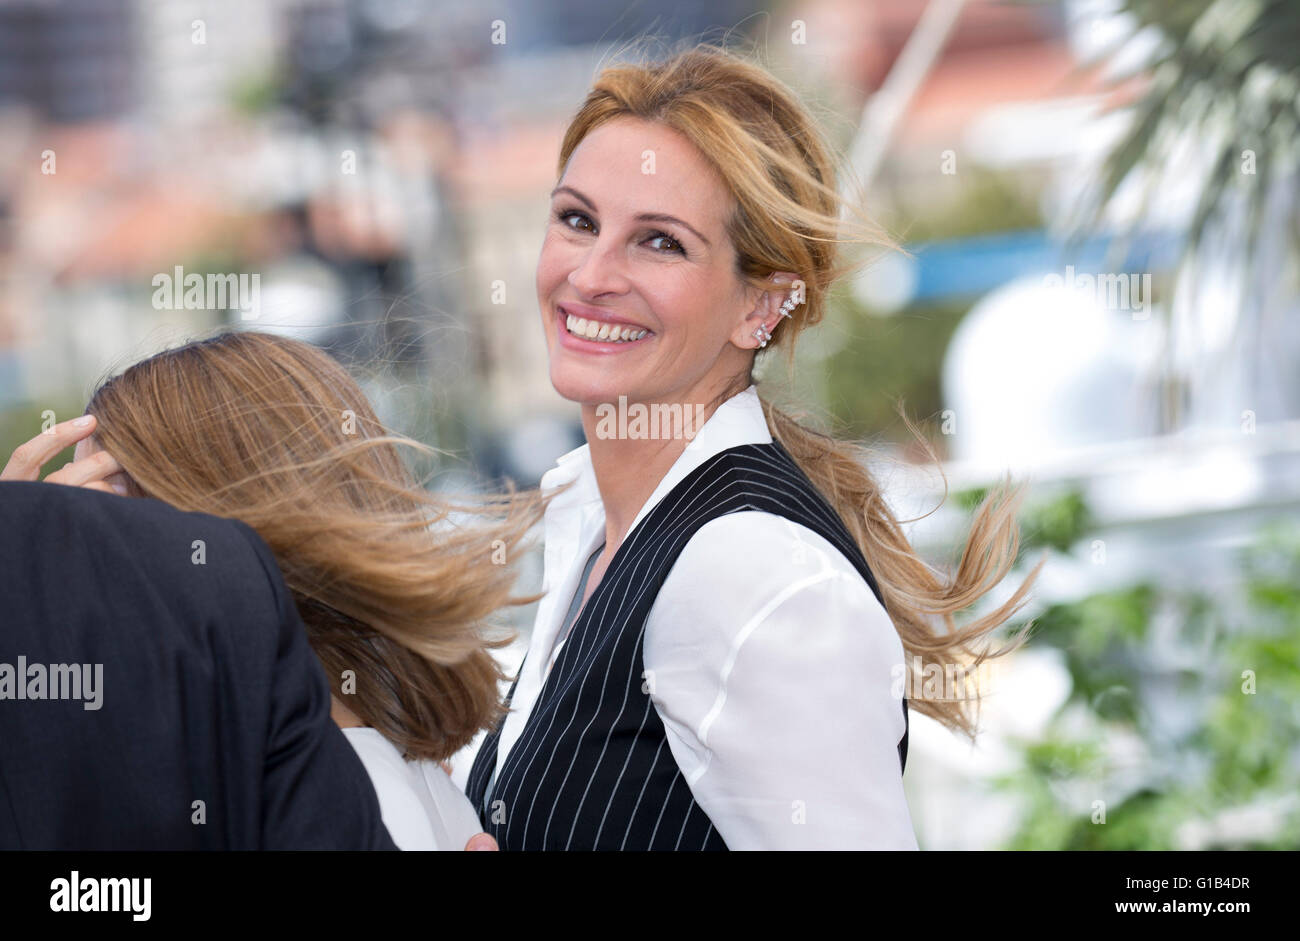 Actress Julia Roberts attends the photocall of Money Monster during the 69th Annual Cannes Film Festival at Palais des Festivals in Cannes, France, on 11 May 2016. Photo: Hubert Boesl /dpa - NO WIRE SERVICE - Stock Photo